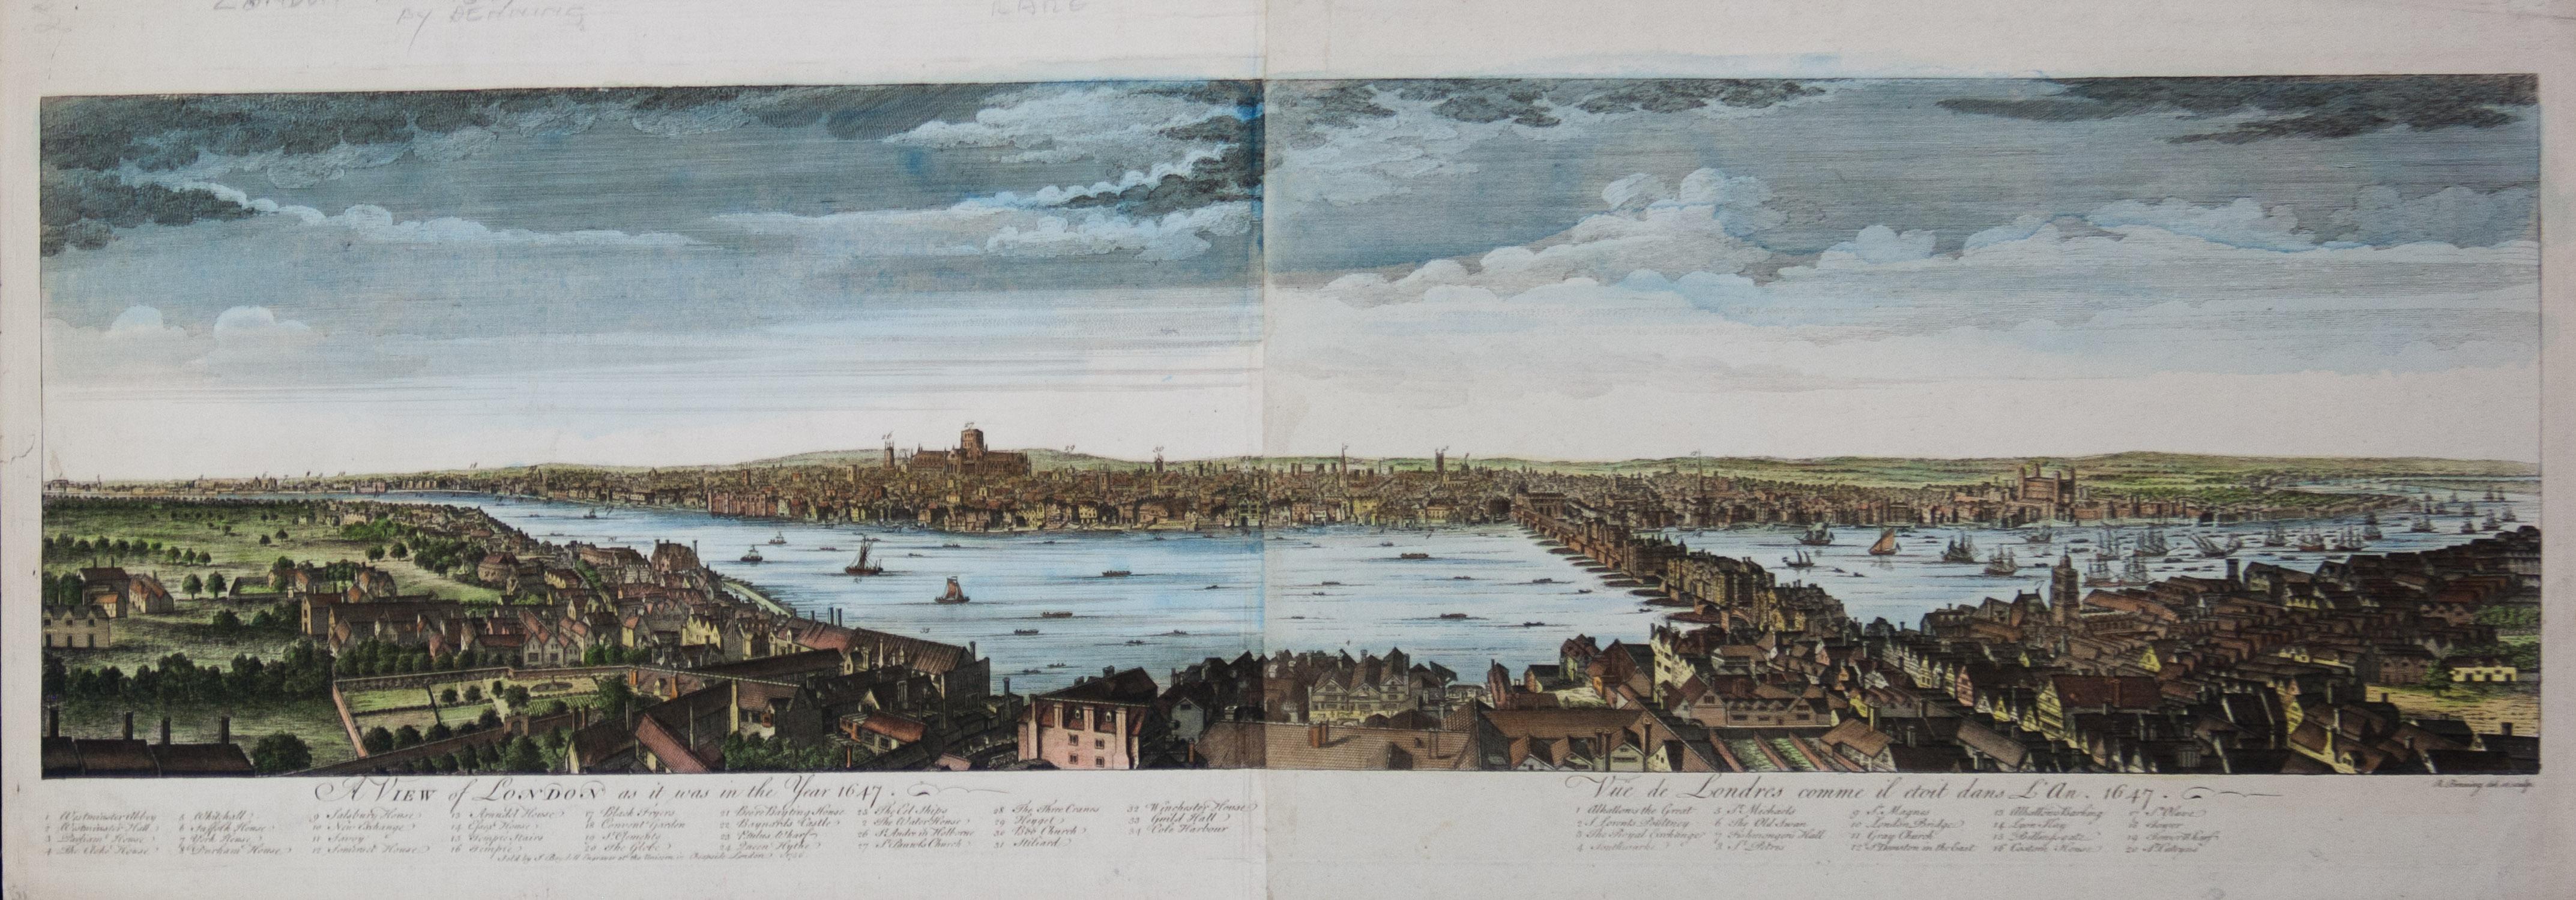 A View of London as it was in the Year 1647 pub. by Boydell 1756